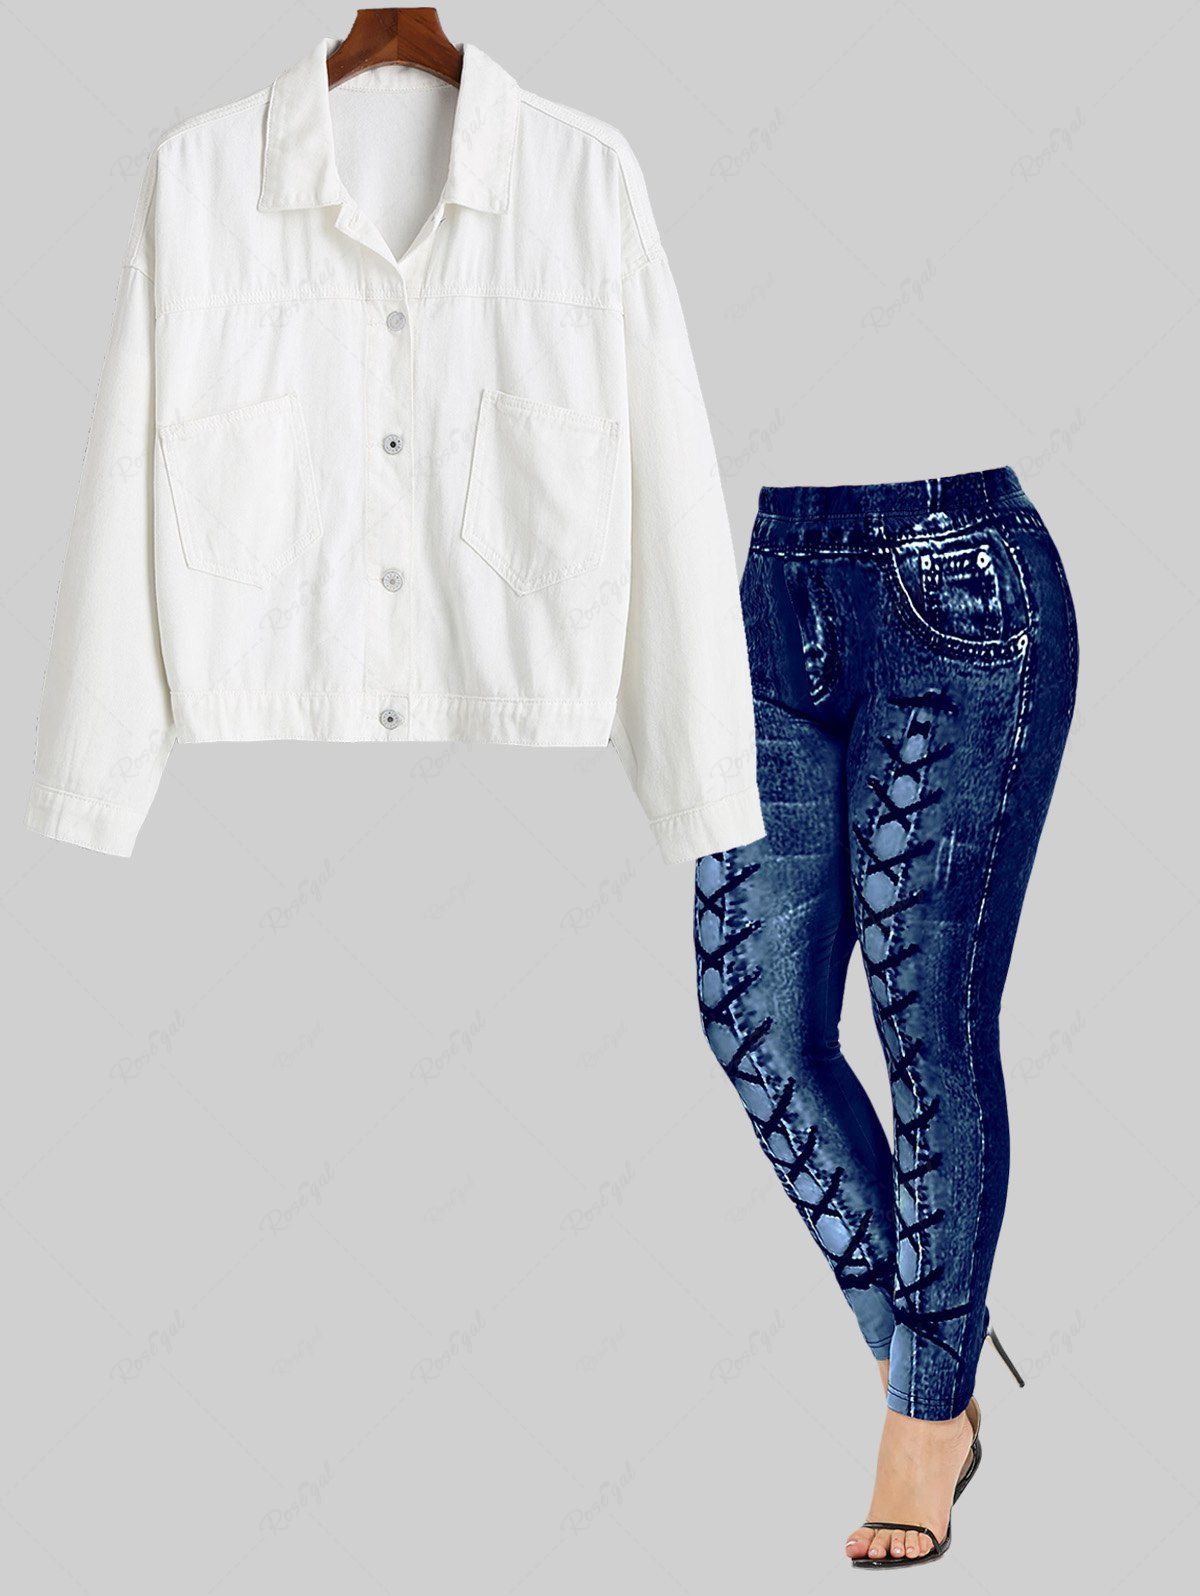 Shops Front Pockets Button Up Denim Jacket and High Waisted 3D Printed Leggings Plus Size Outerwear Outfit  